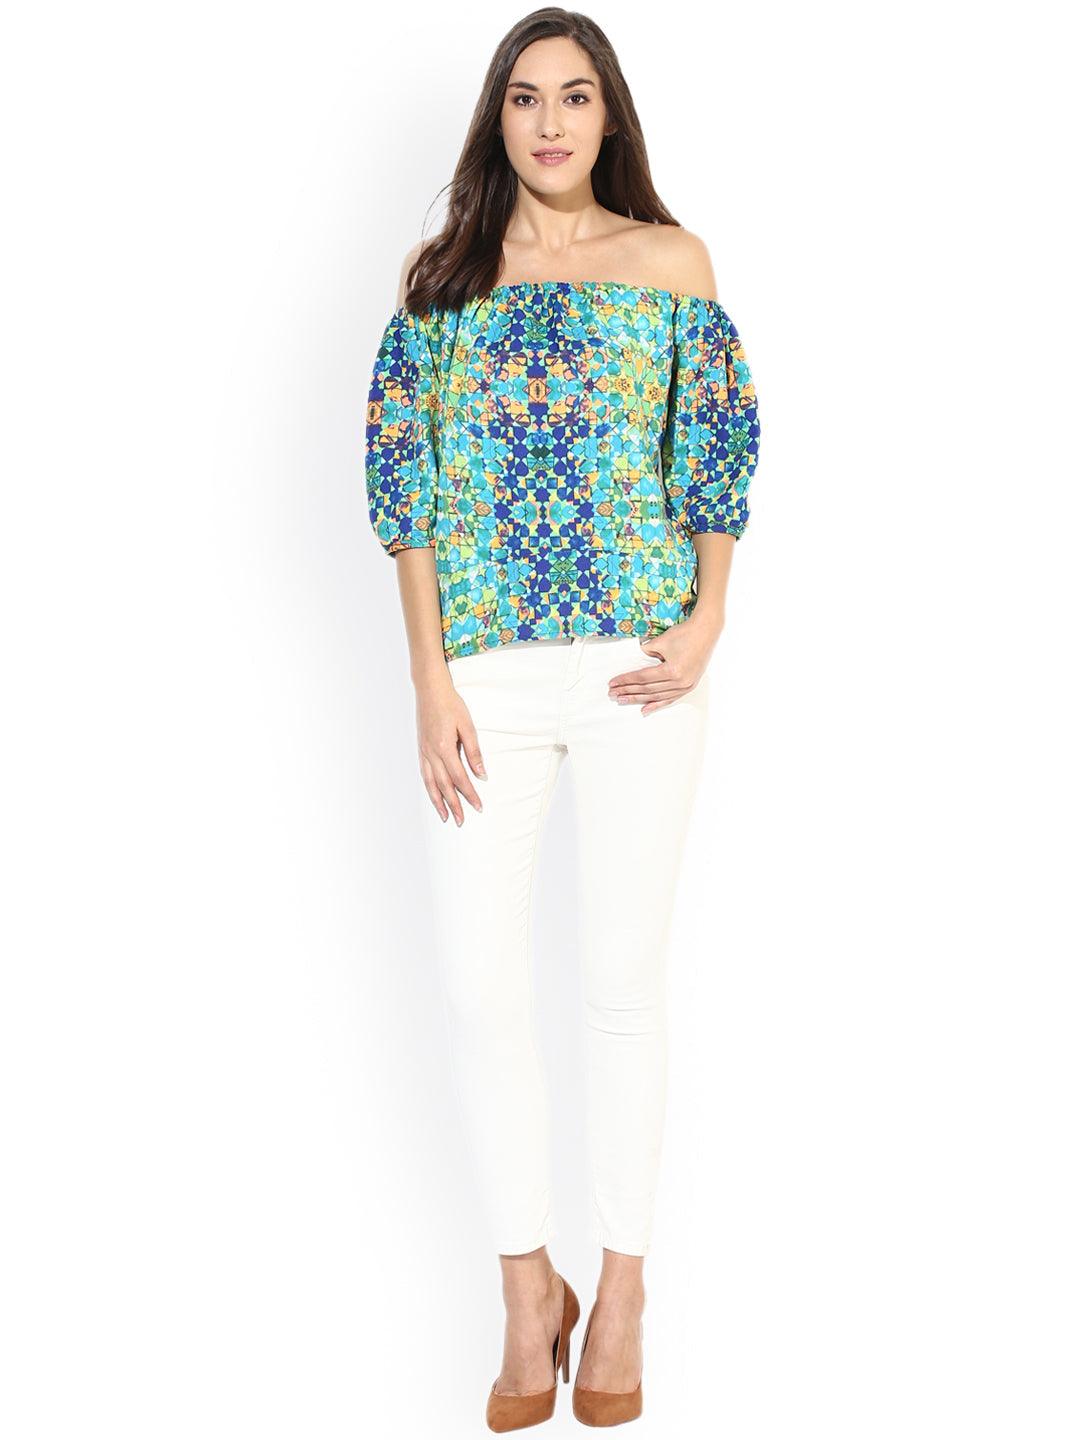 Multicoloured Printed Top - Znxclothing